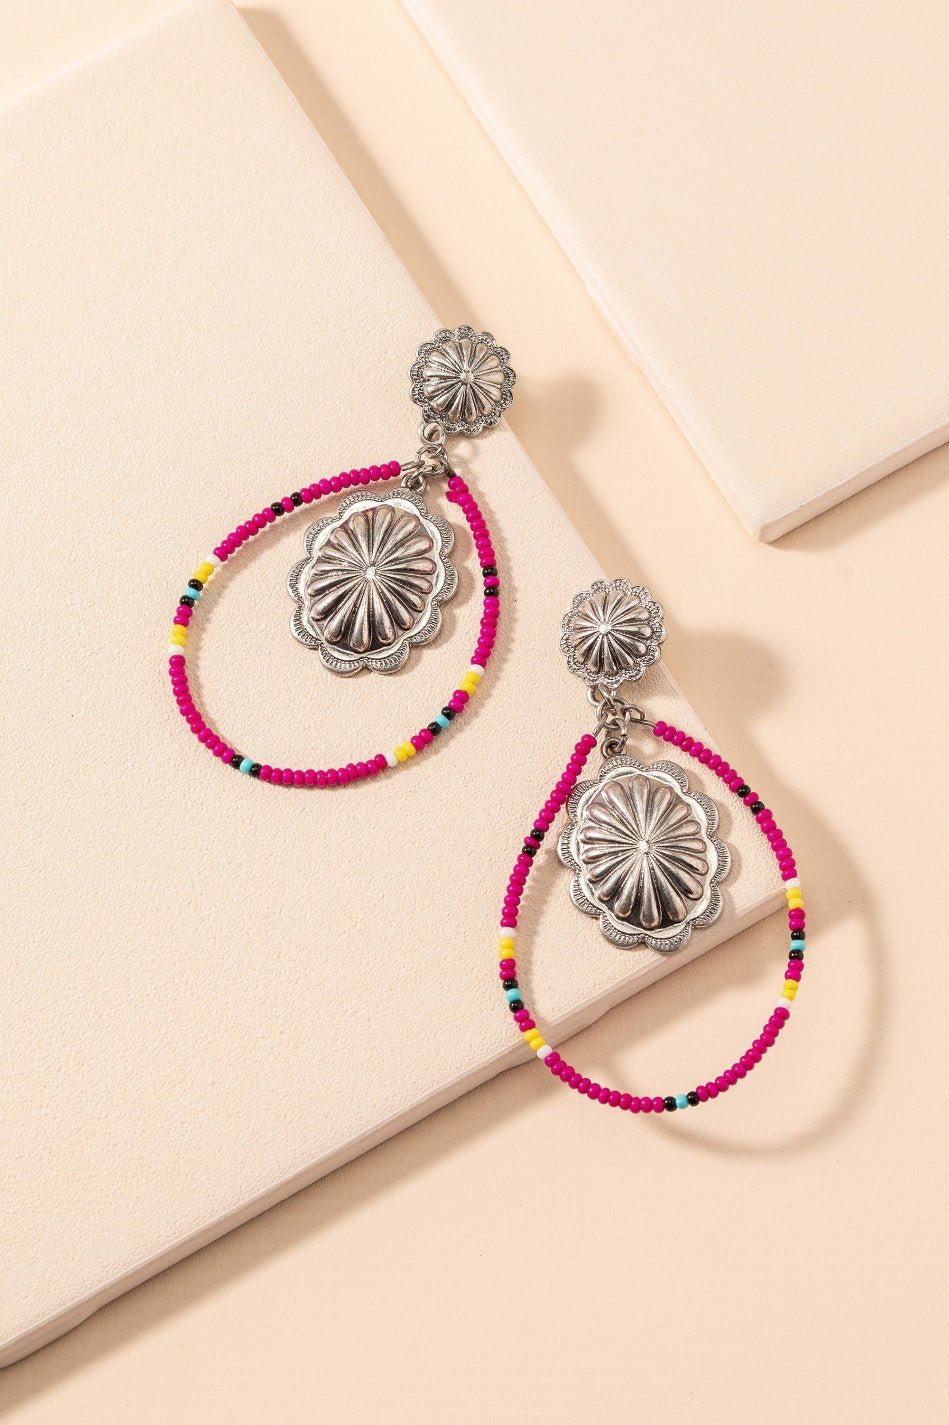 Be a wild western flower with these Western Concho Bead Dangle Earrings! Featuring a beaded tear drop shape, with flower silver concho detail - they'll add a touch of cowgirl charm to any look. Crafted from nickel free materials with pink seed beads to complete the look, these earrings will always have you galloping ahead of the pack!